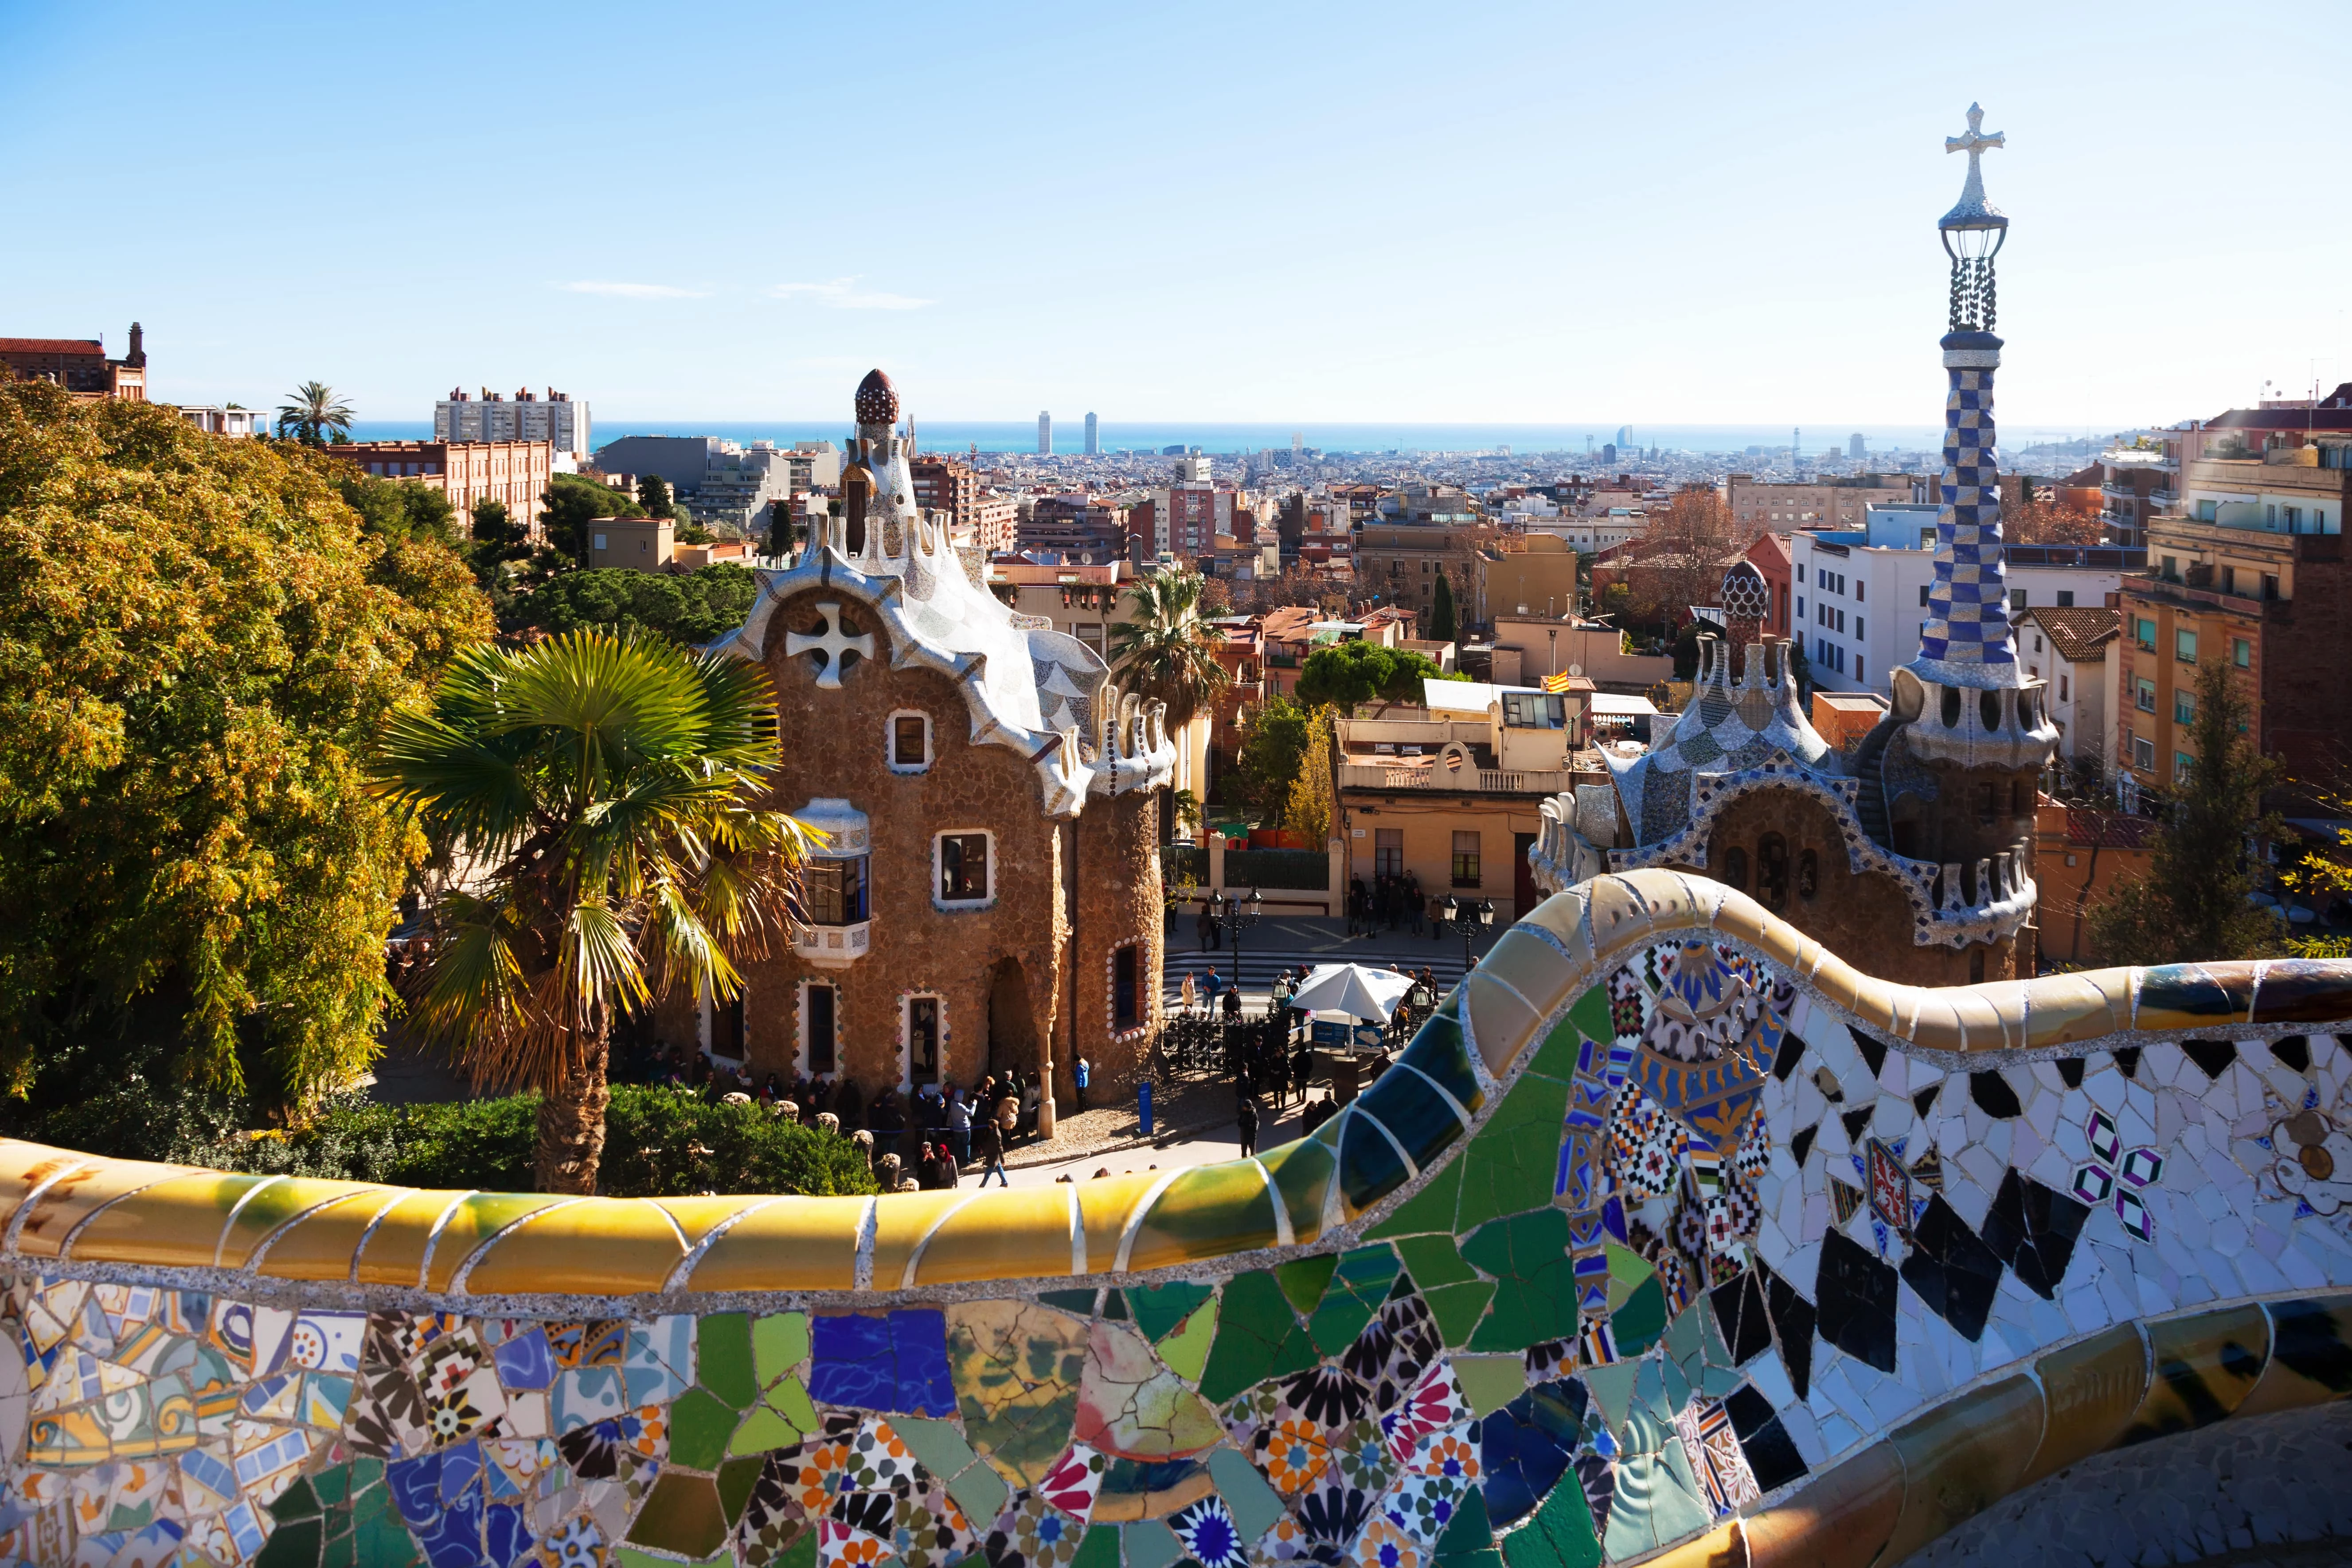 Barcelona is a vibrant city with restaurants, museum and many shops and cosy streets.